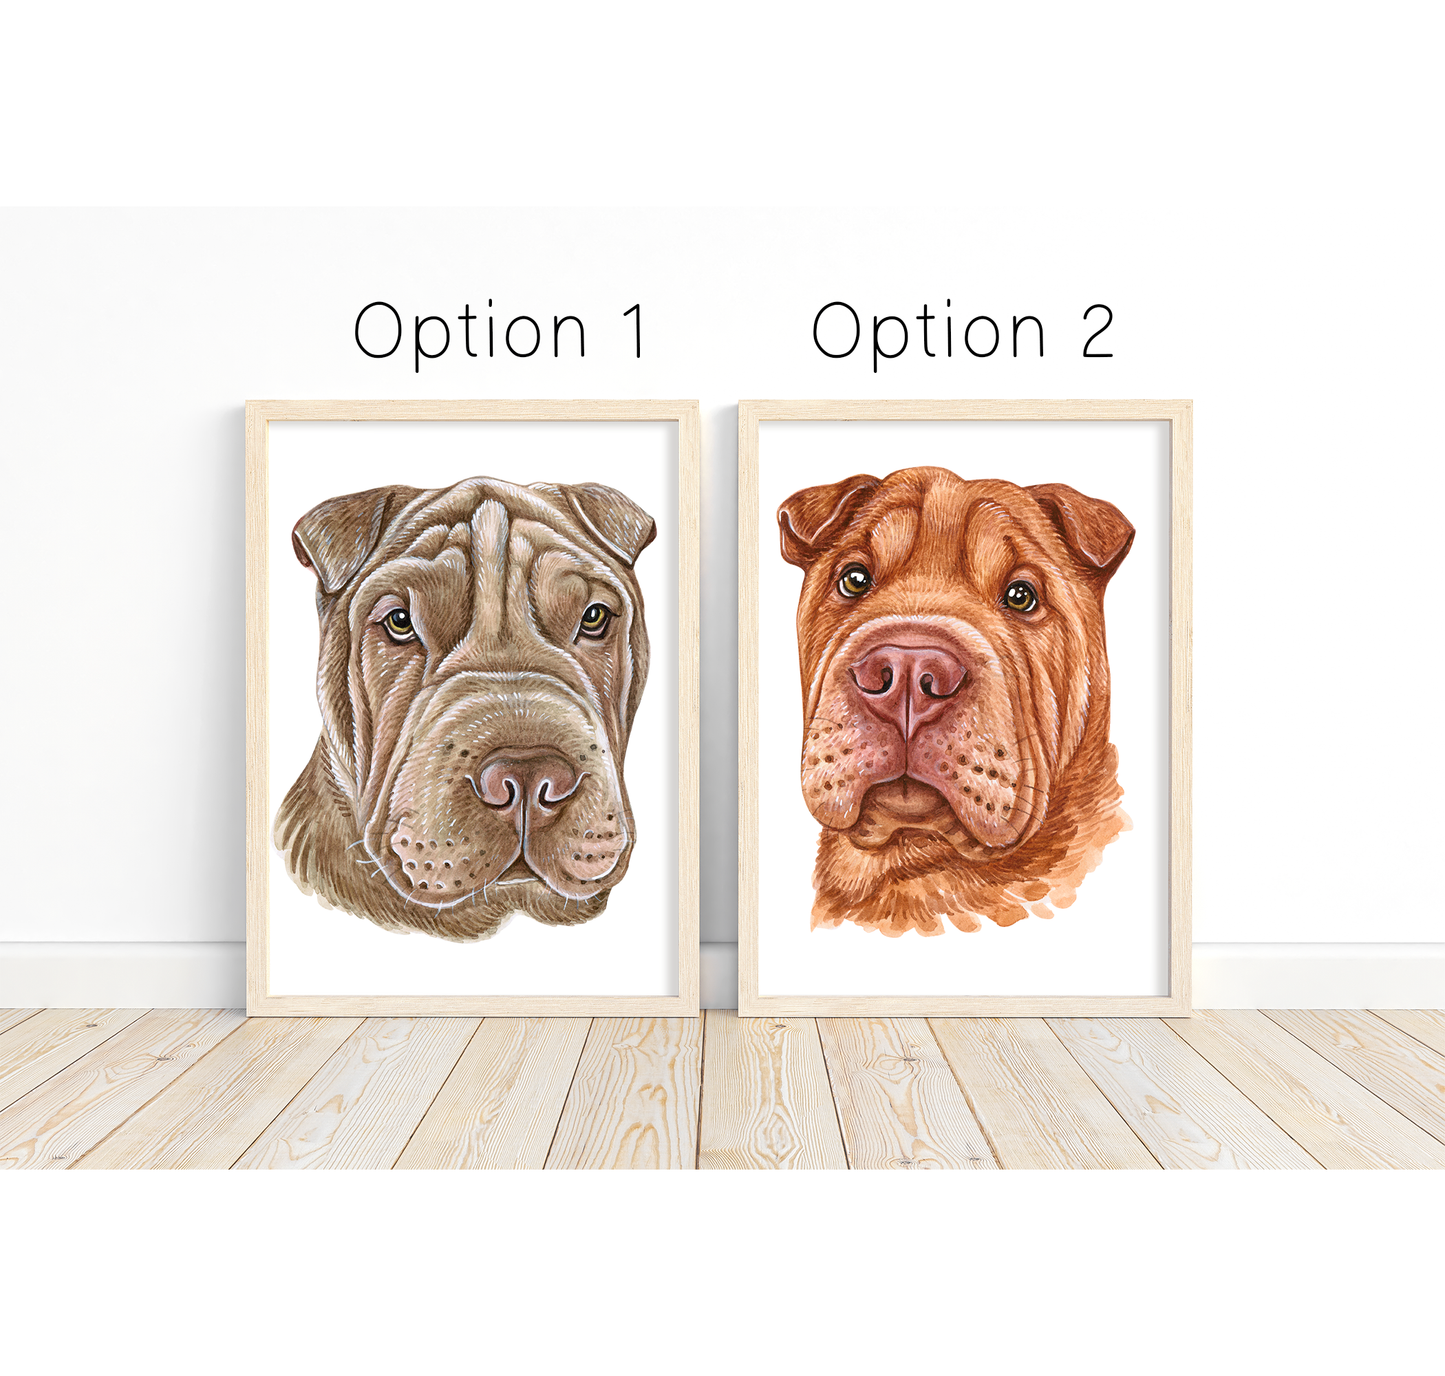 Shar Pei dog artwork - adorable dog portraits with custom funny or heart warming message | A4 | A5 | Greeting card